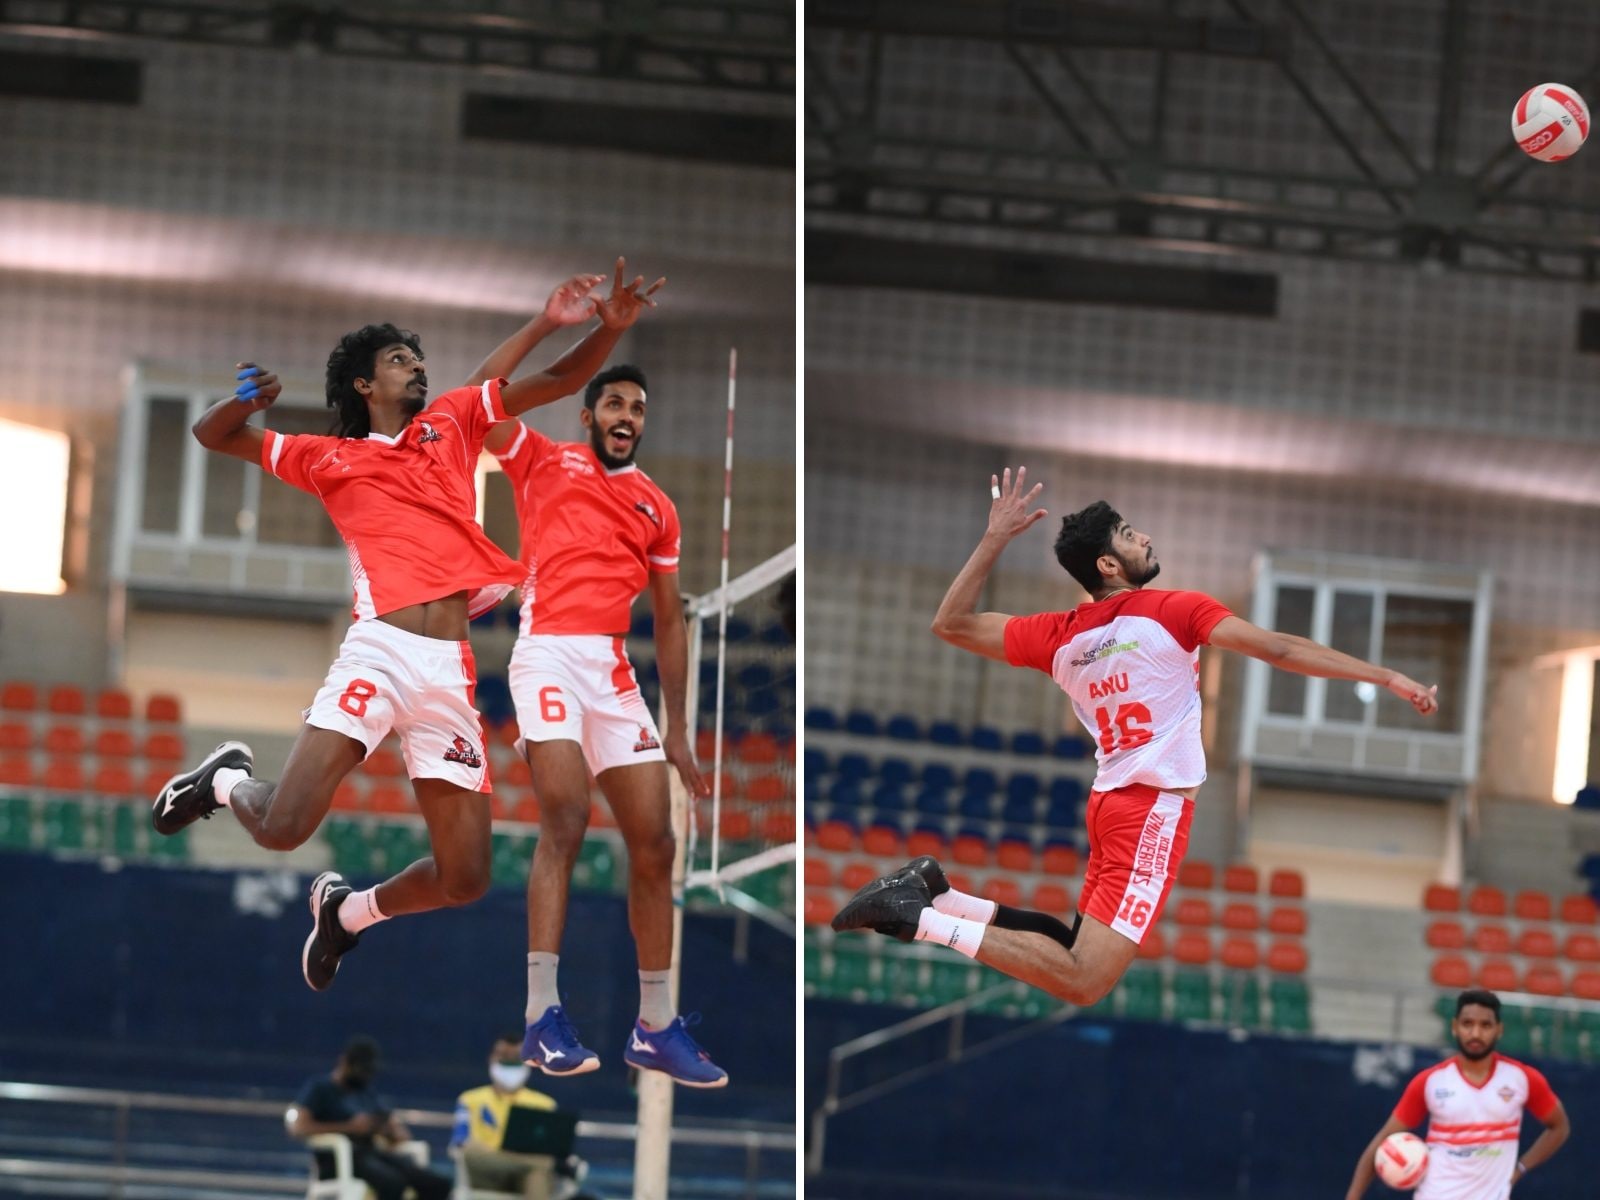 Calicut Heroes Take on Kolkata Thunderbolts in Third Match of Prime Volleyball League